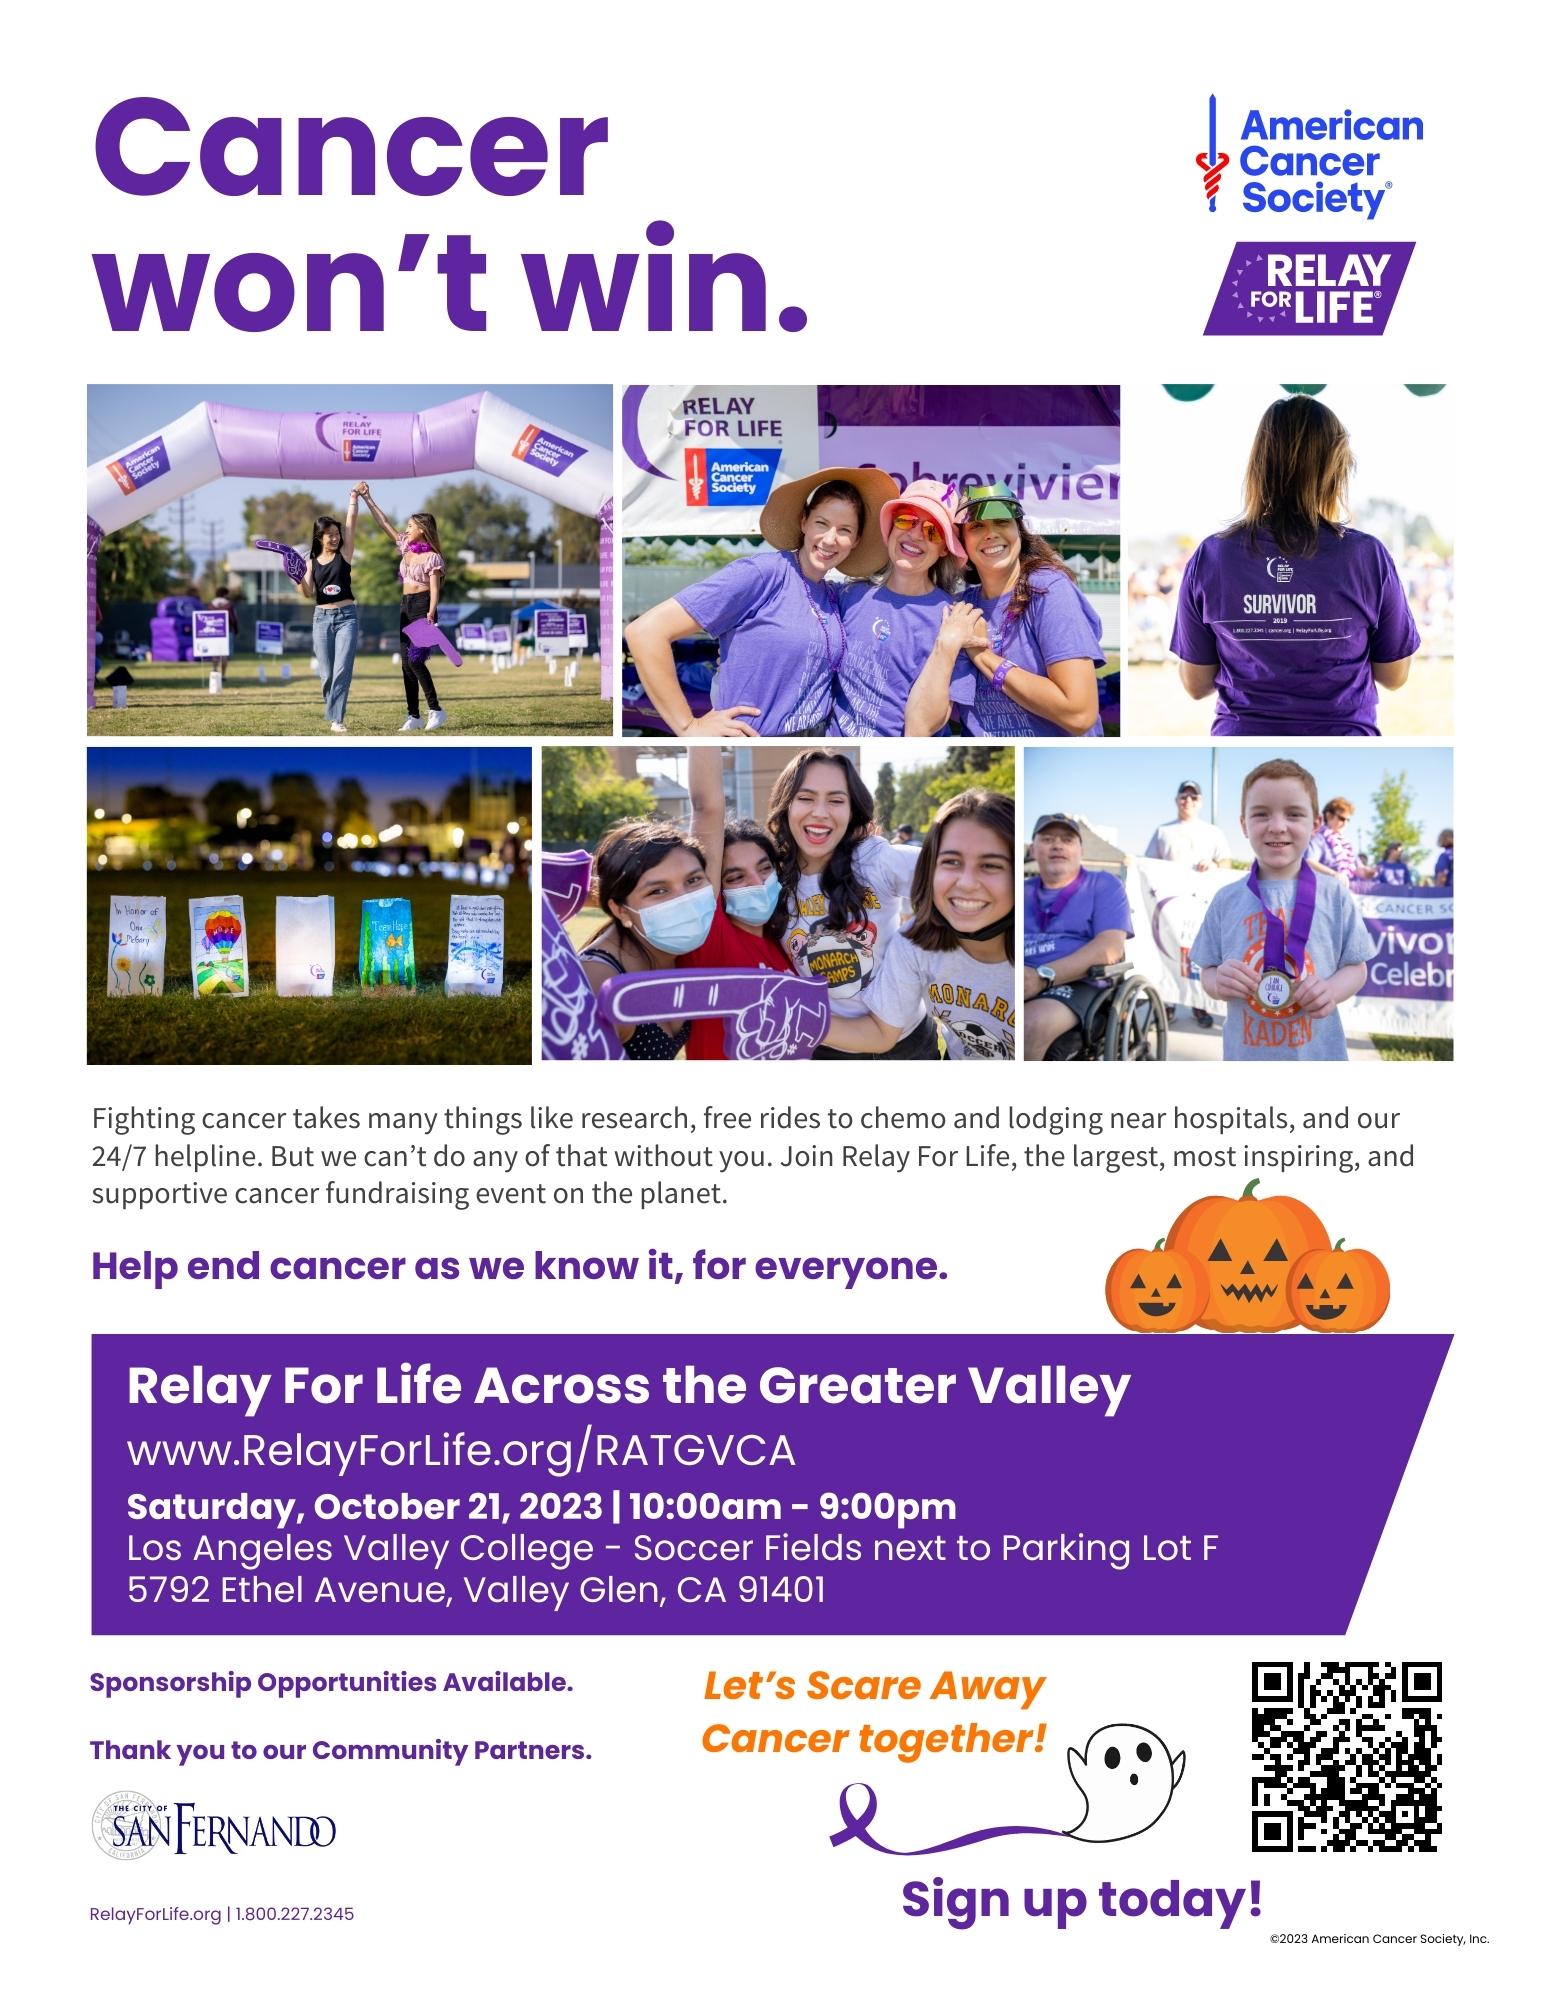 2023 Relay For Life Across The Greater Valley Flyer - English